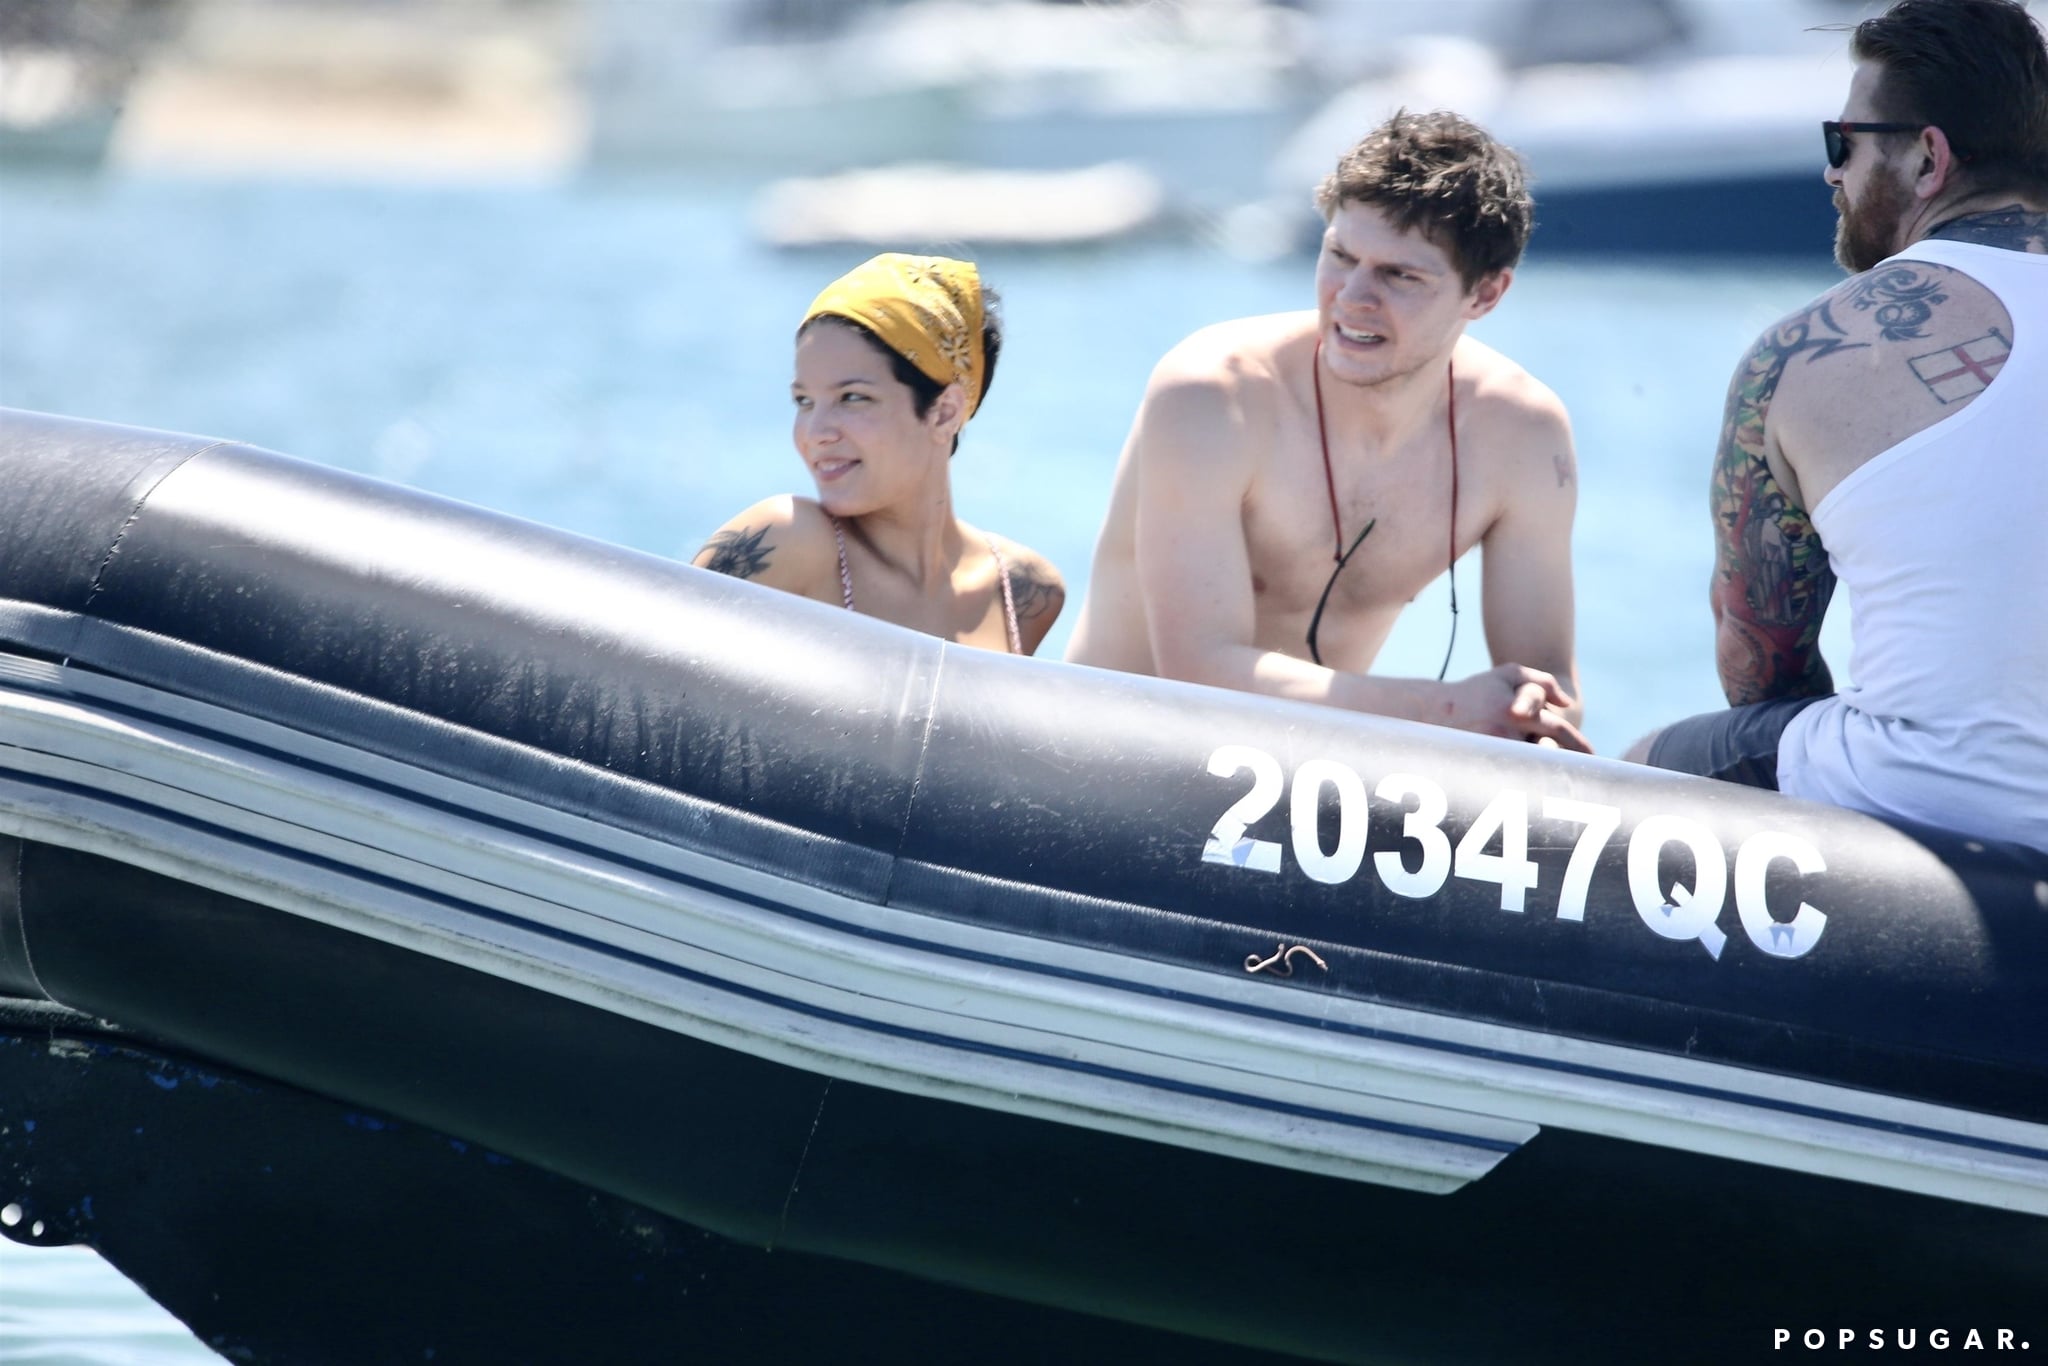 Halsey And Evan Peters On Vacation In Australia Pictures Popsugar Celebrity